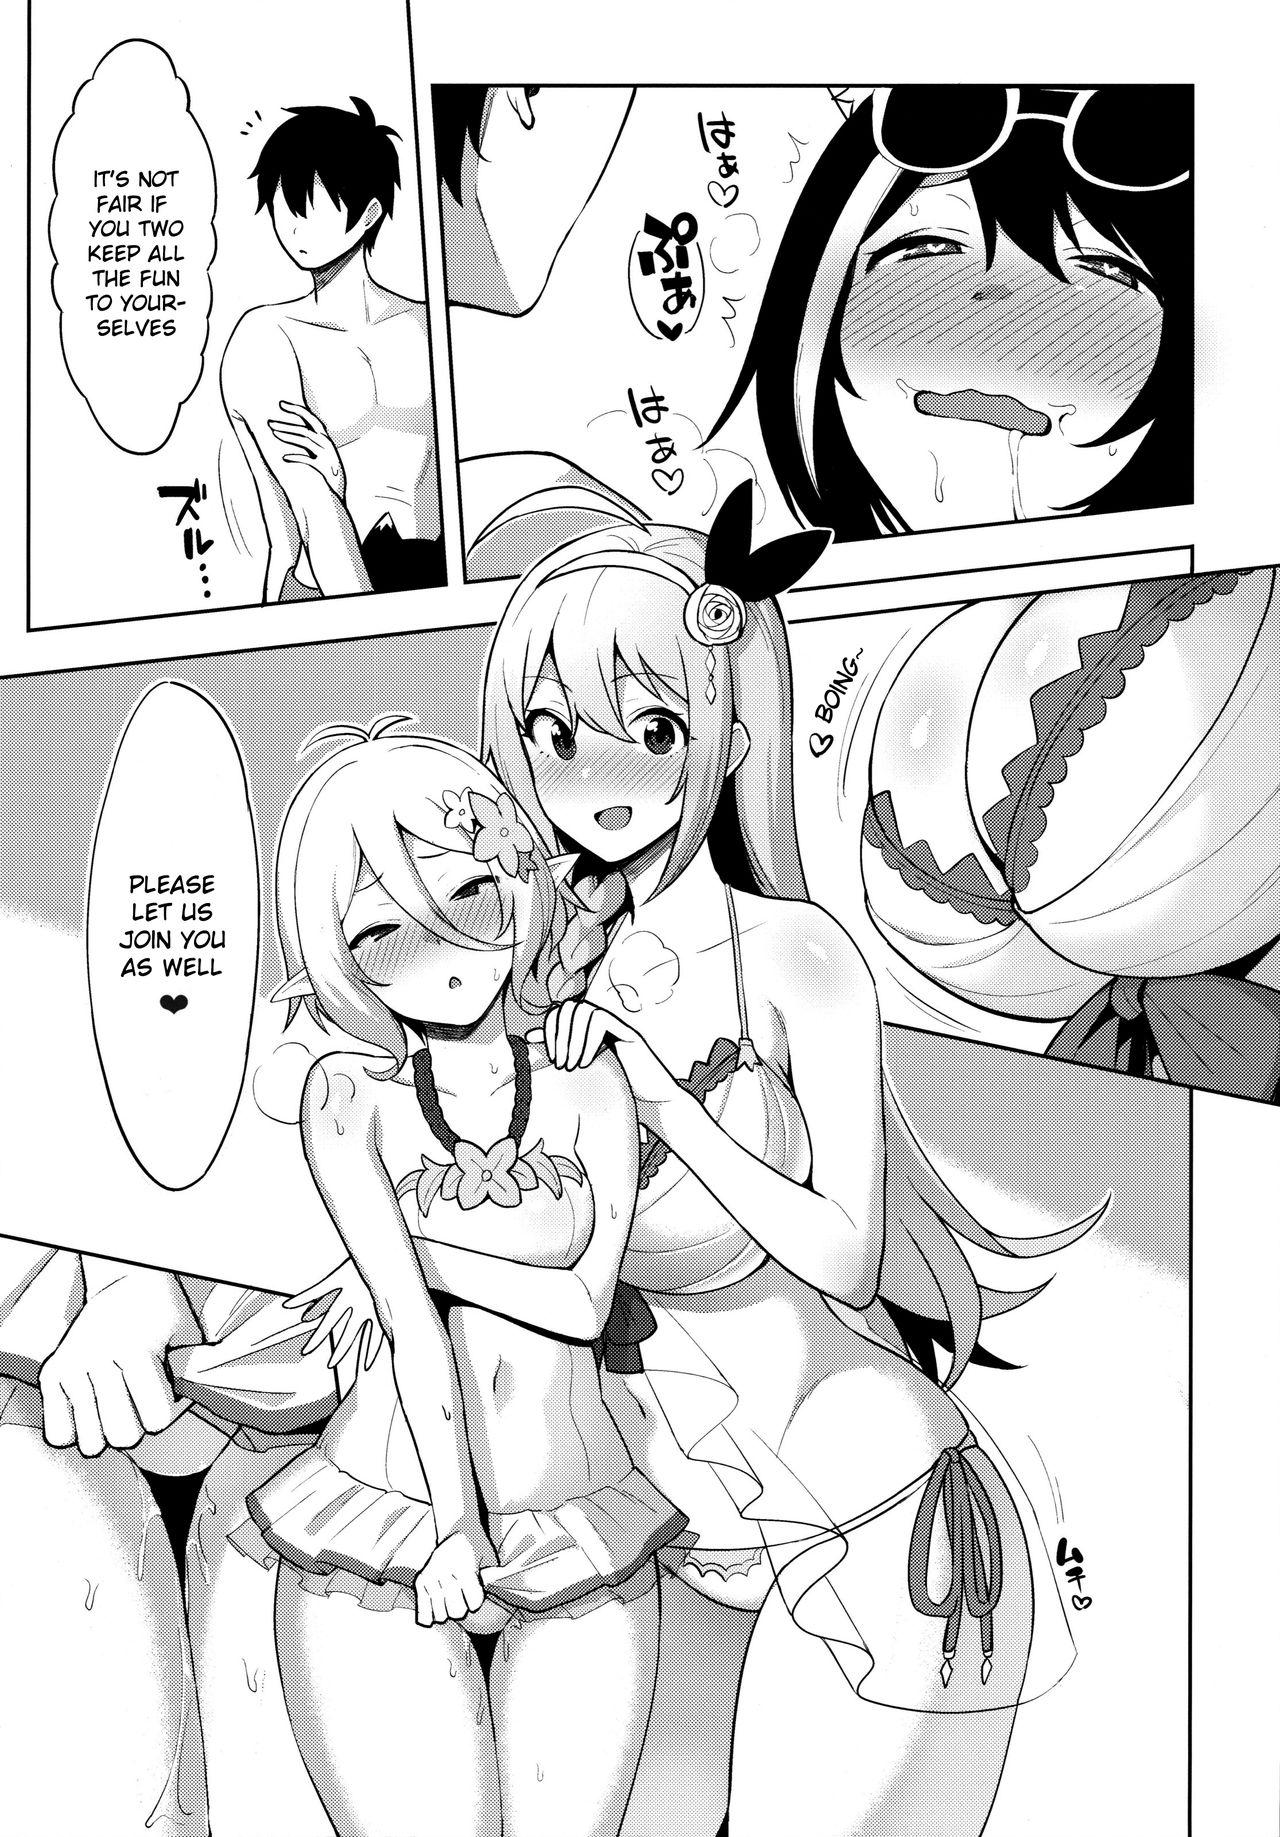 Babe Princess to Connect Shitai! ReDive! | I want to connect with a princess! ReDive! - Princess connect Double Blowjob - Page 6